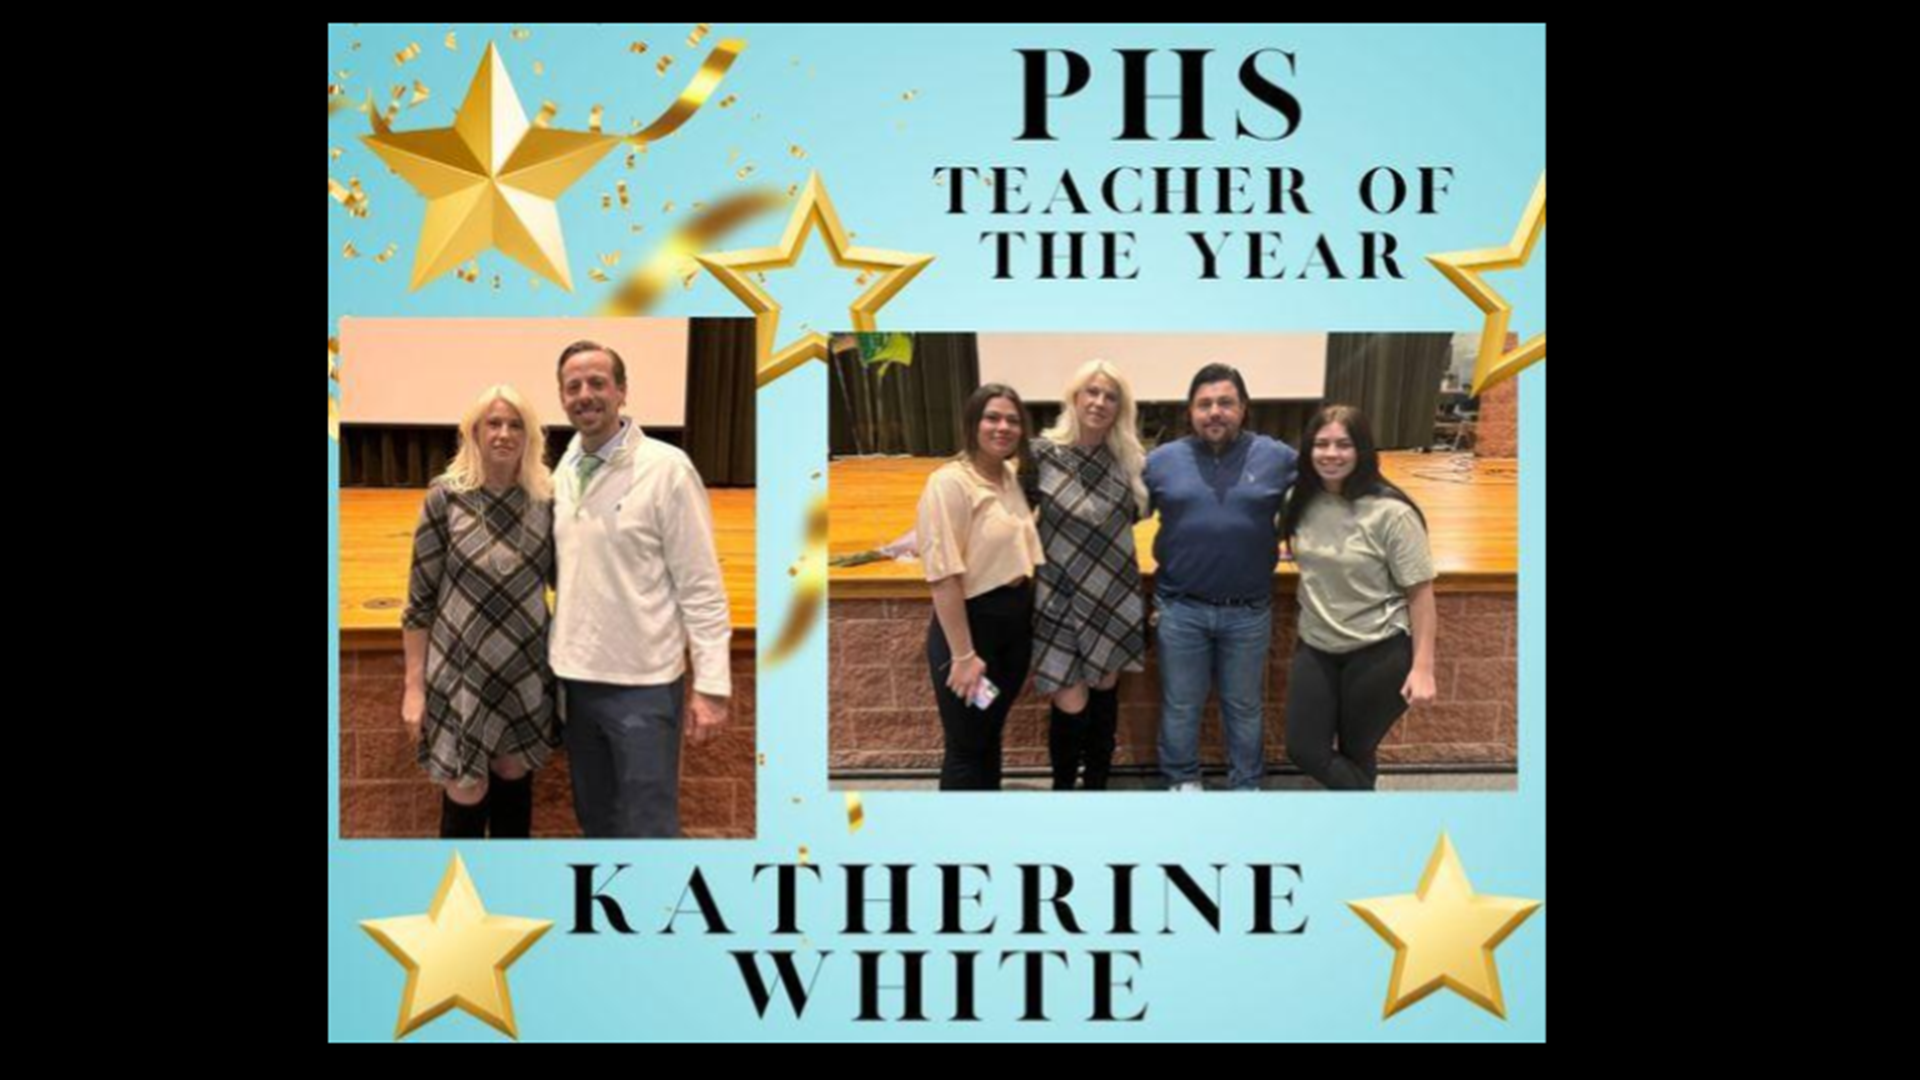 CONGRATULATIONS TO THE PHS TEACHER OF THE YEAR